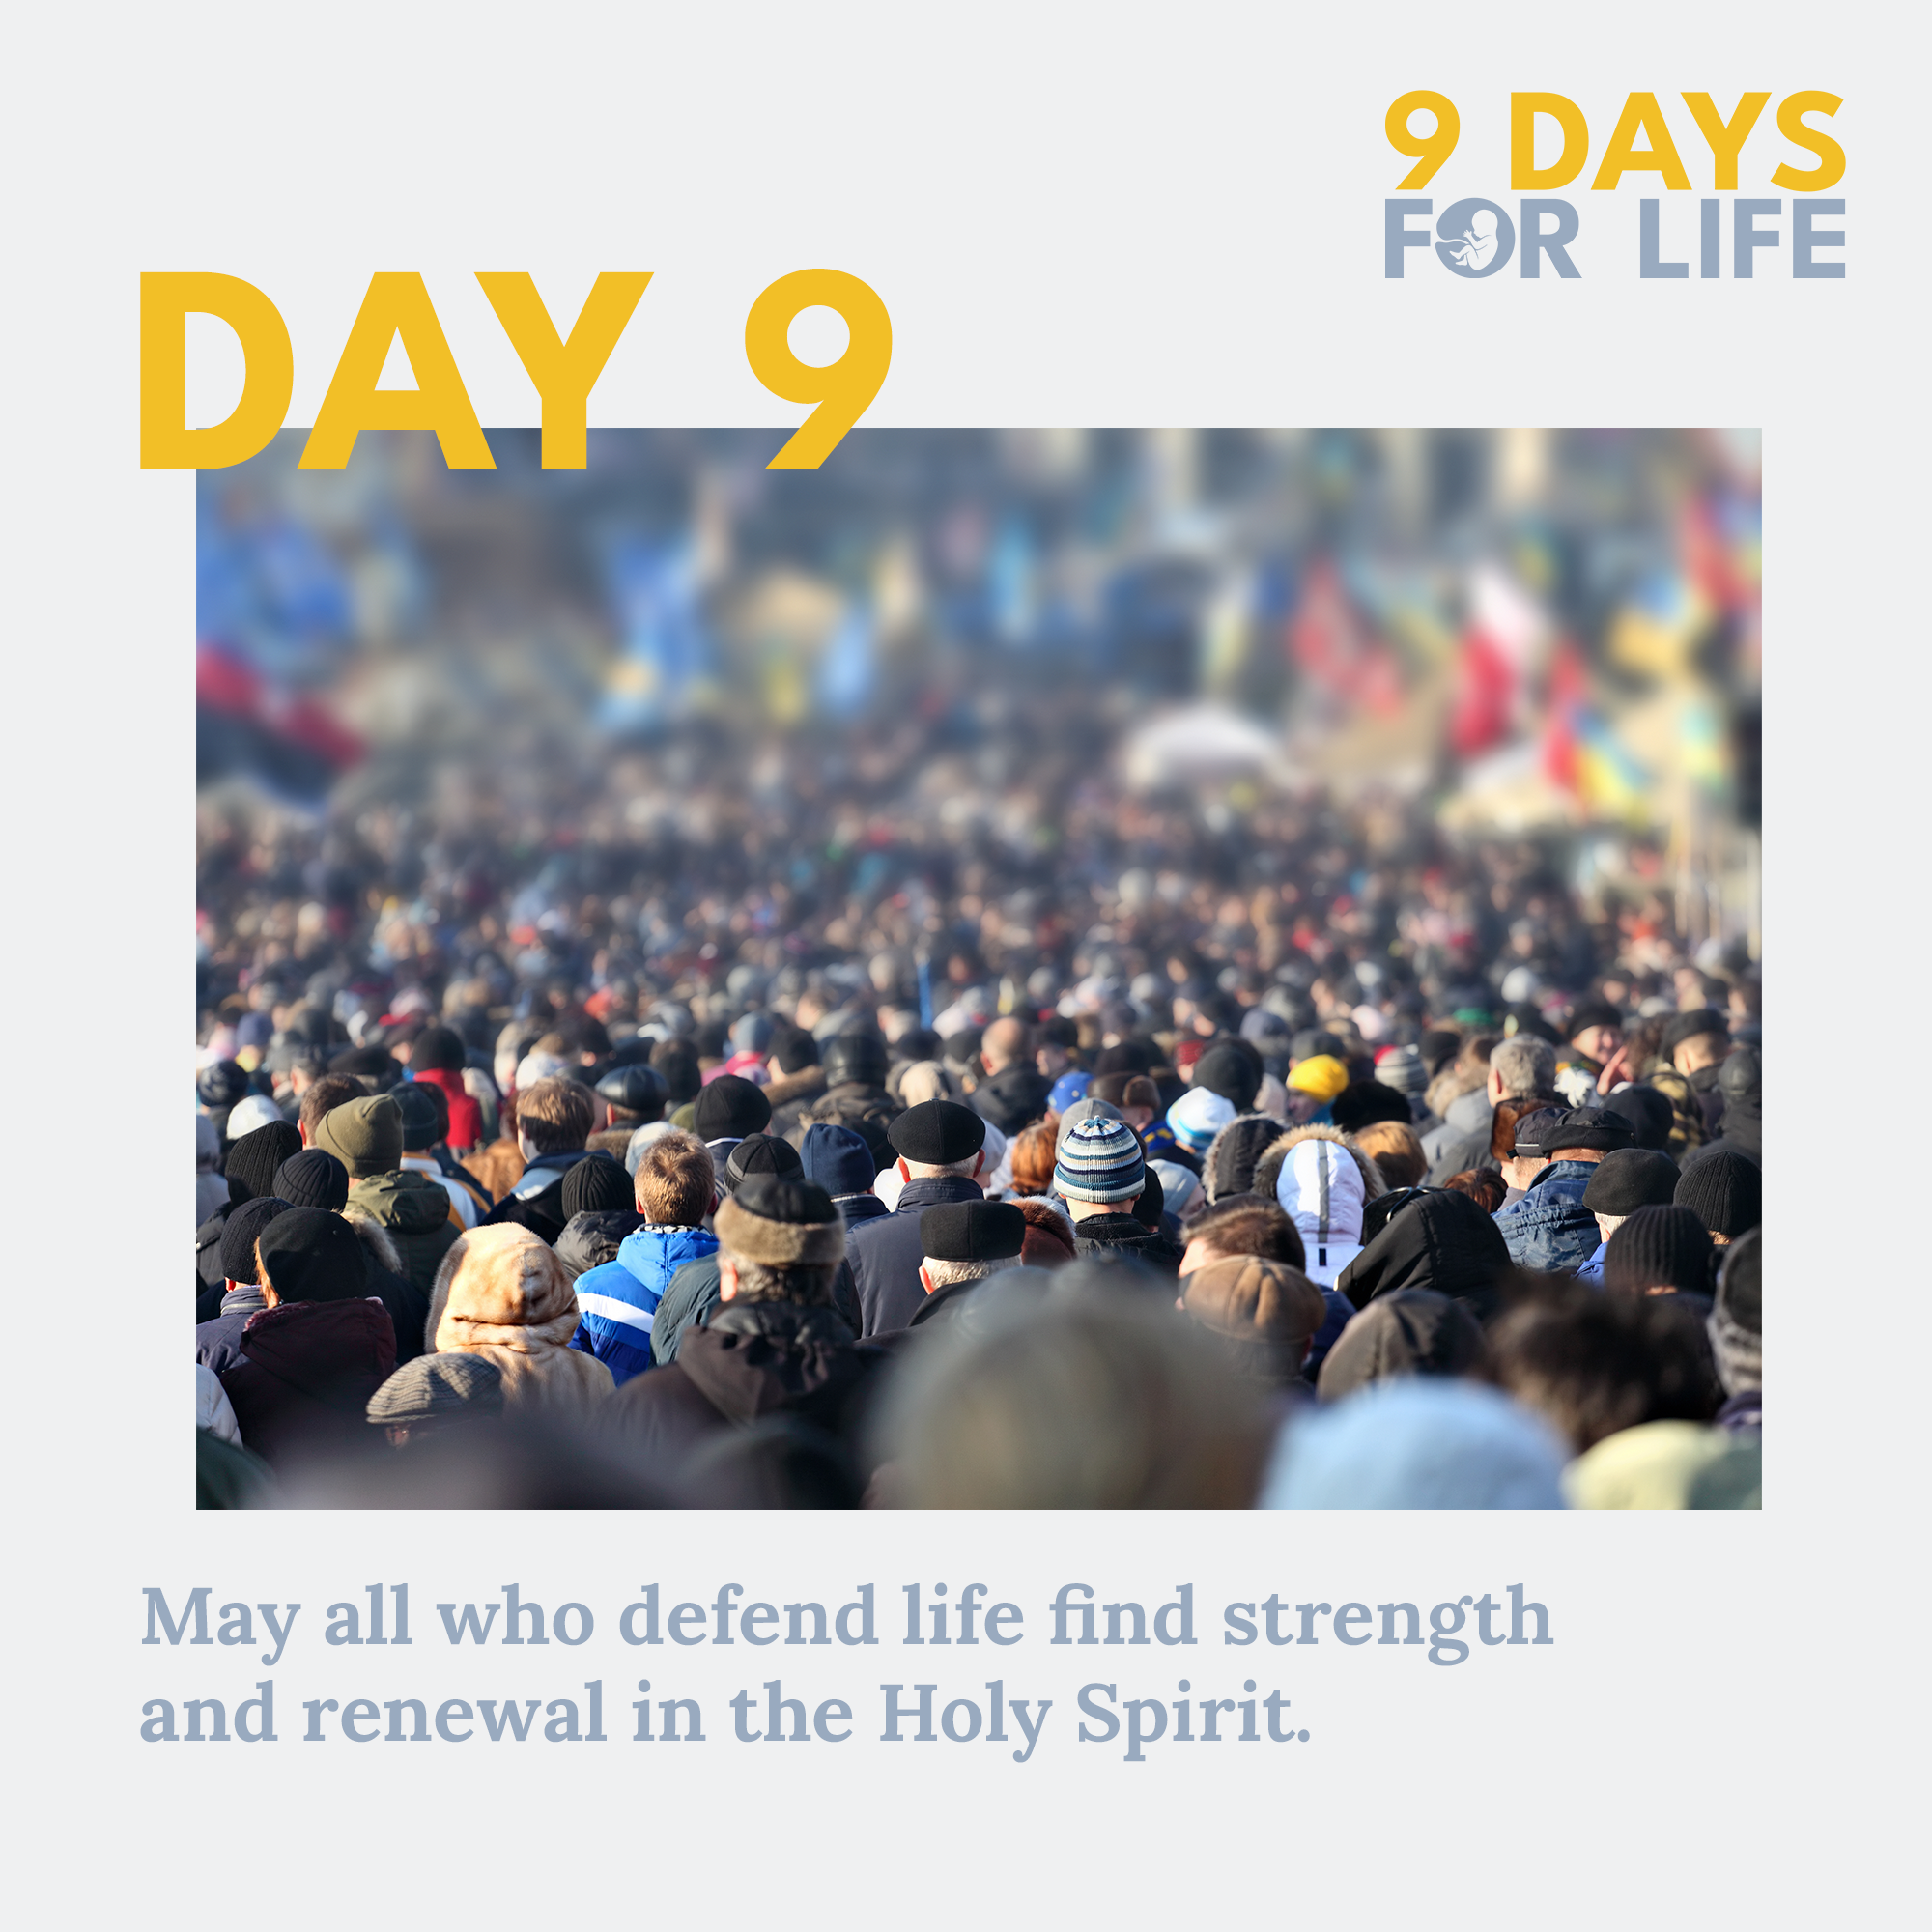 Day 9 - 9 Days for Life - Crowd of People